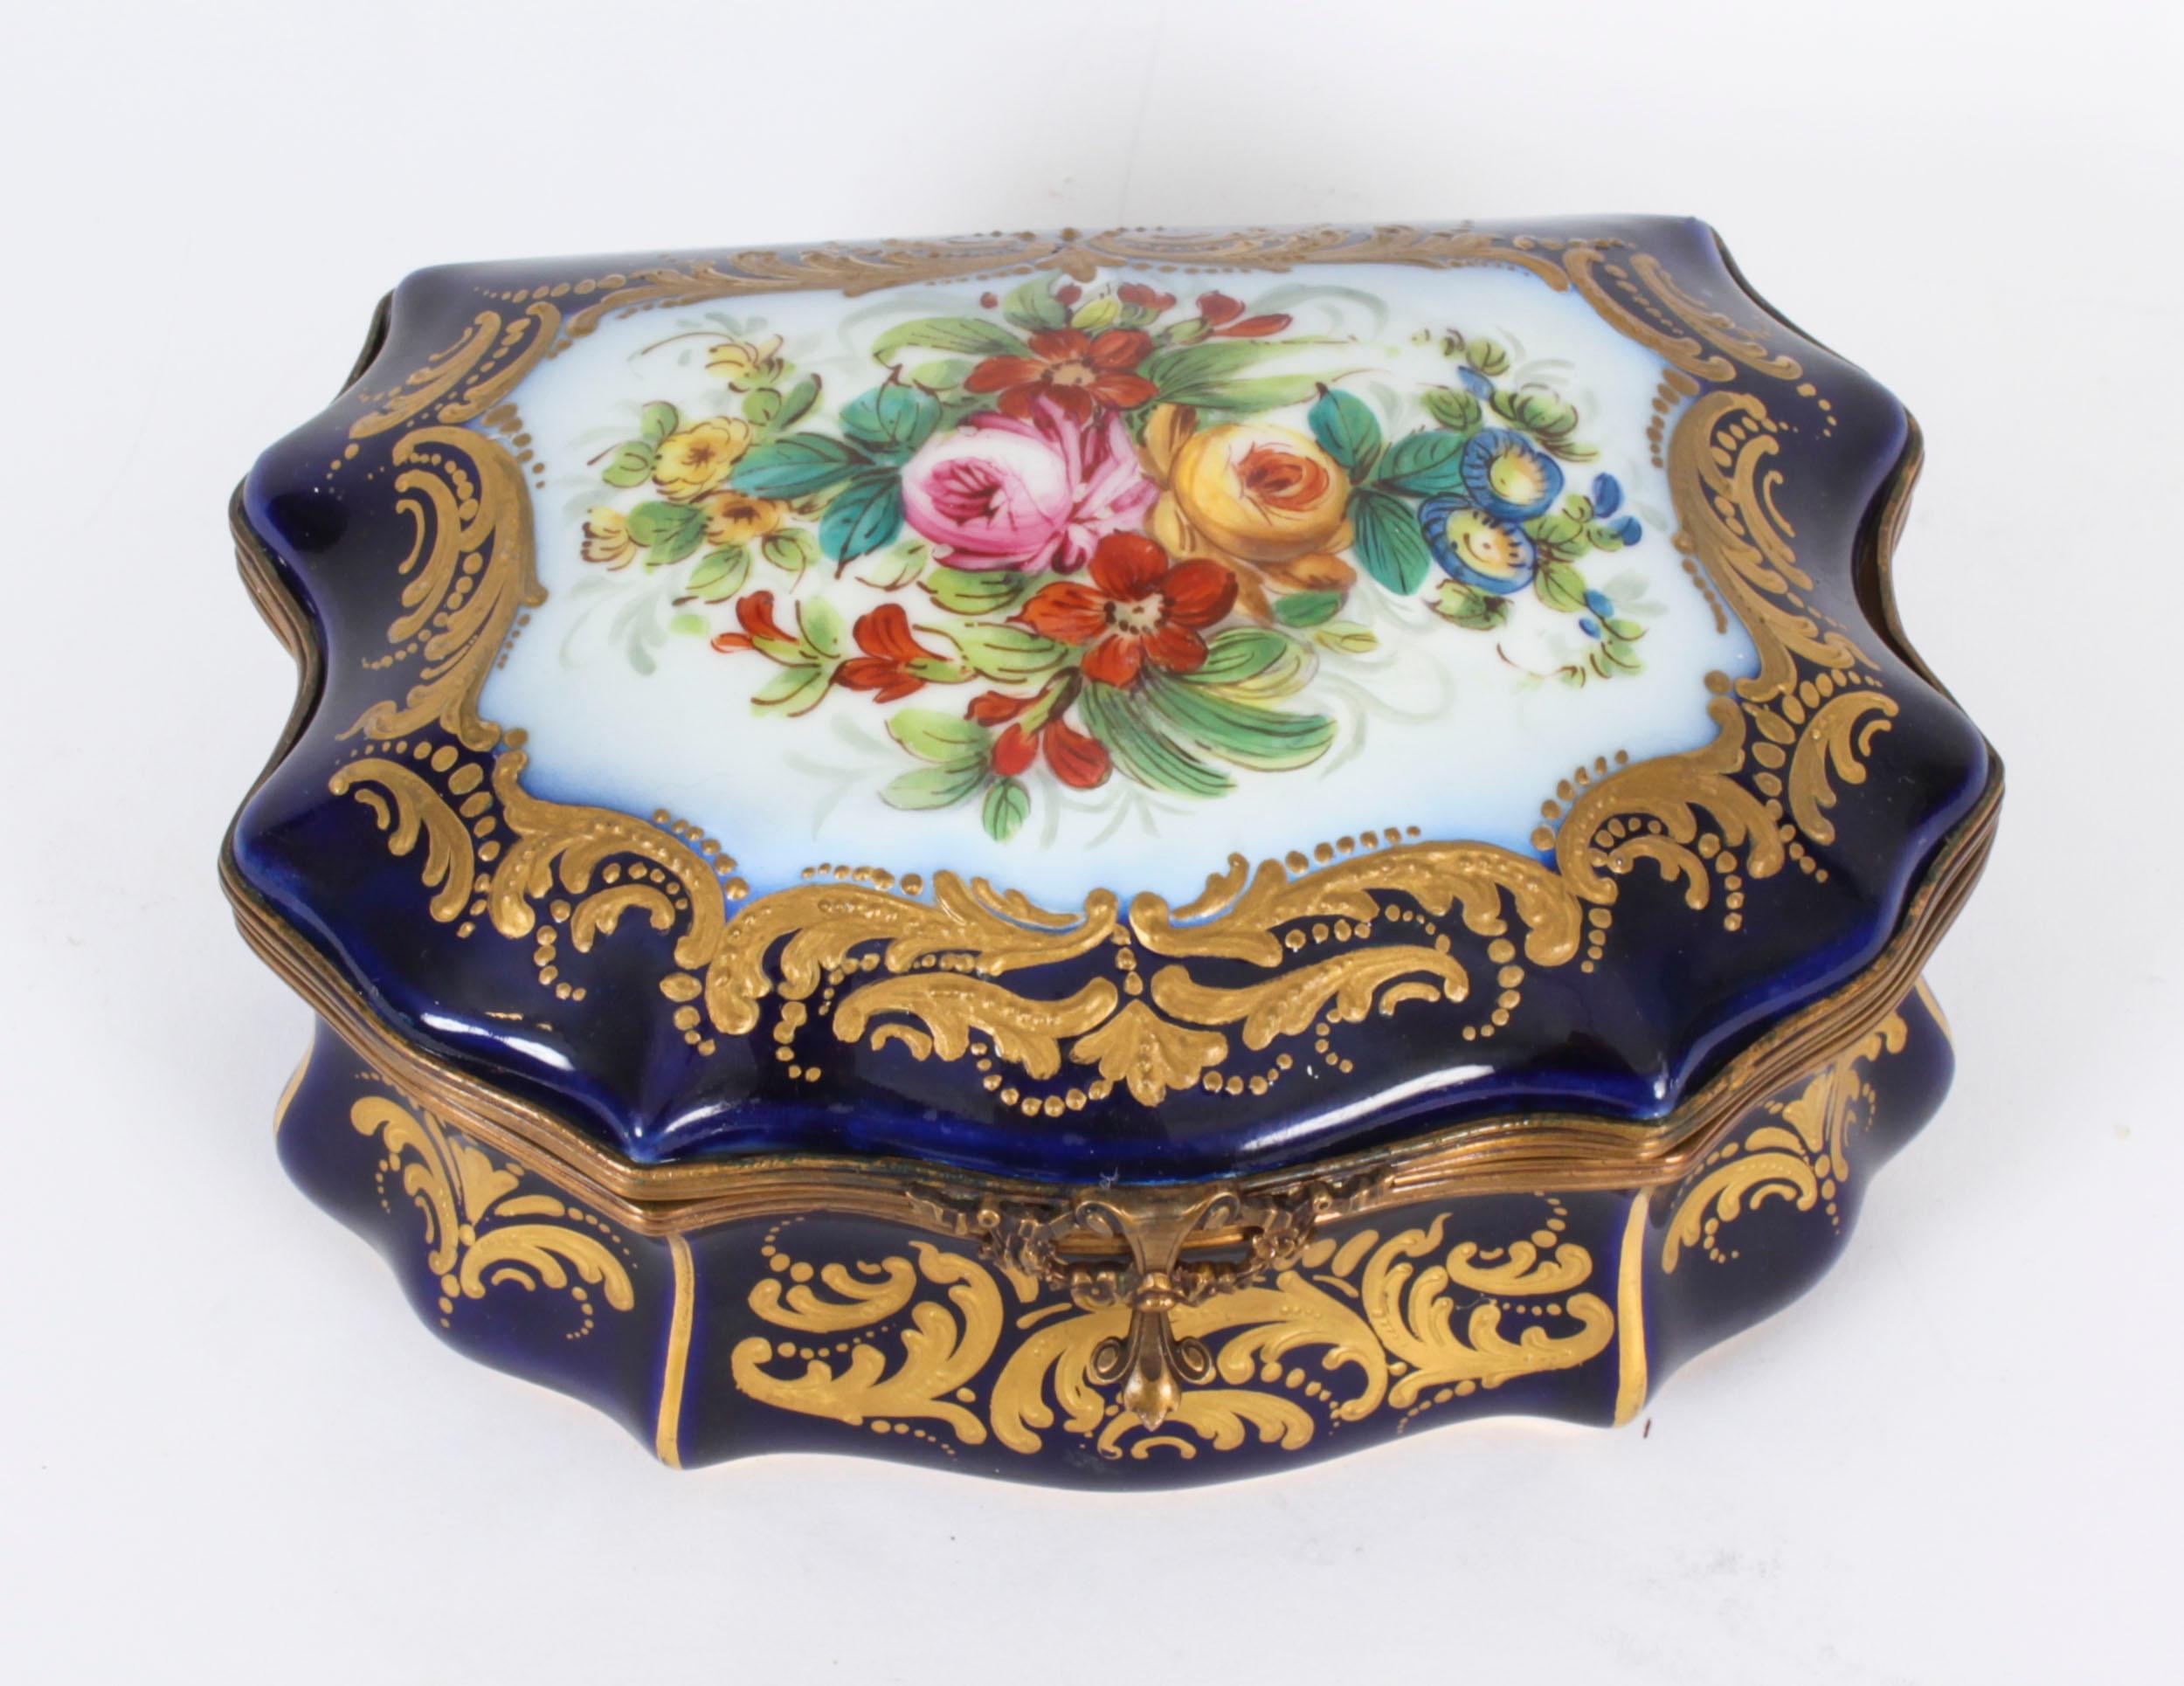 This is a fabulous antique French Sevres porcelain Cobalt Blue ormolu mounted  casket, Circa 1880 in date.

The shaped hinged cover decorated with a hand painted floral spray in a richly gilded border, the front, rear and sides decorated with 